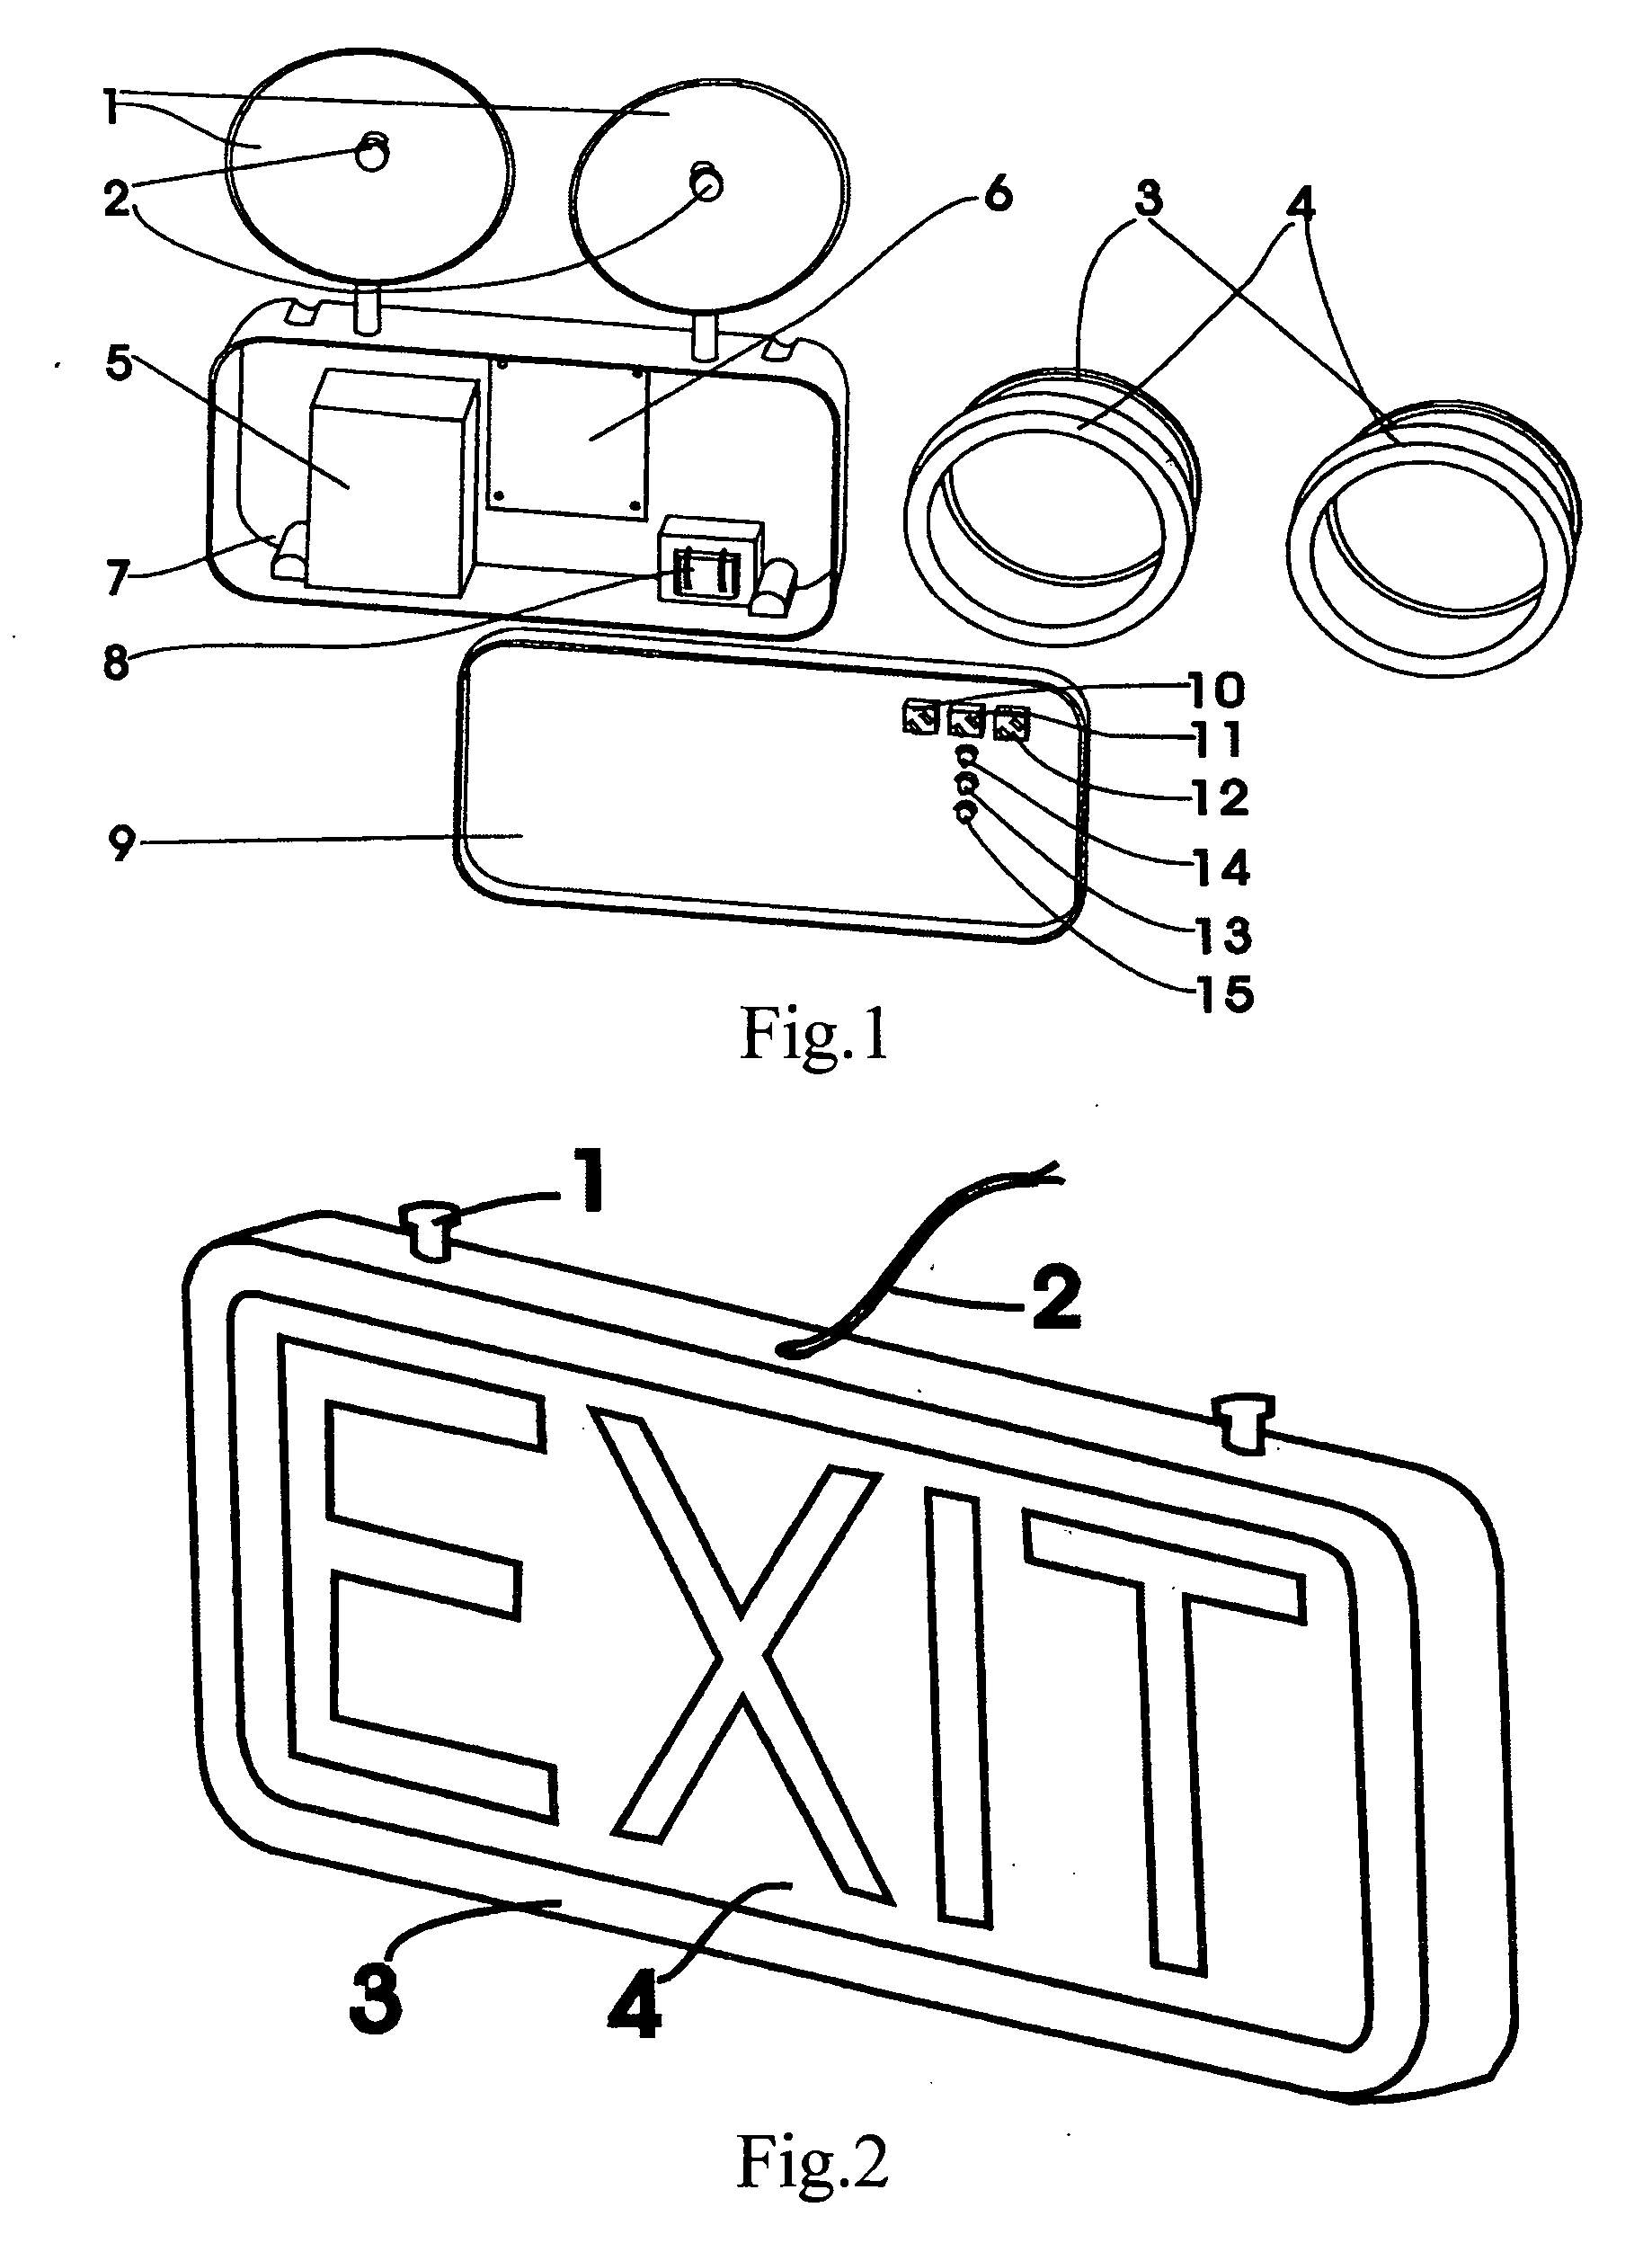 Apparatus integrated with cold light emergency lamp and cold light exit sign